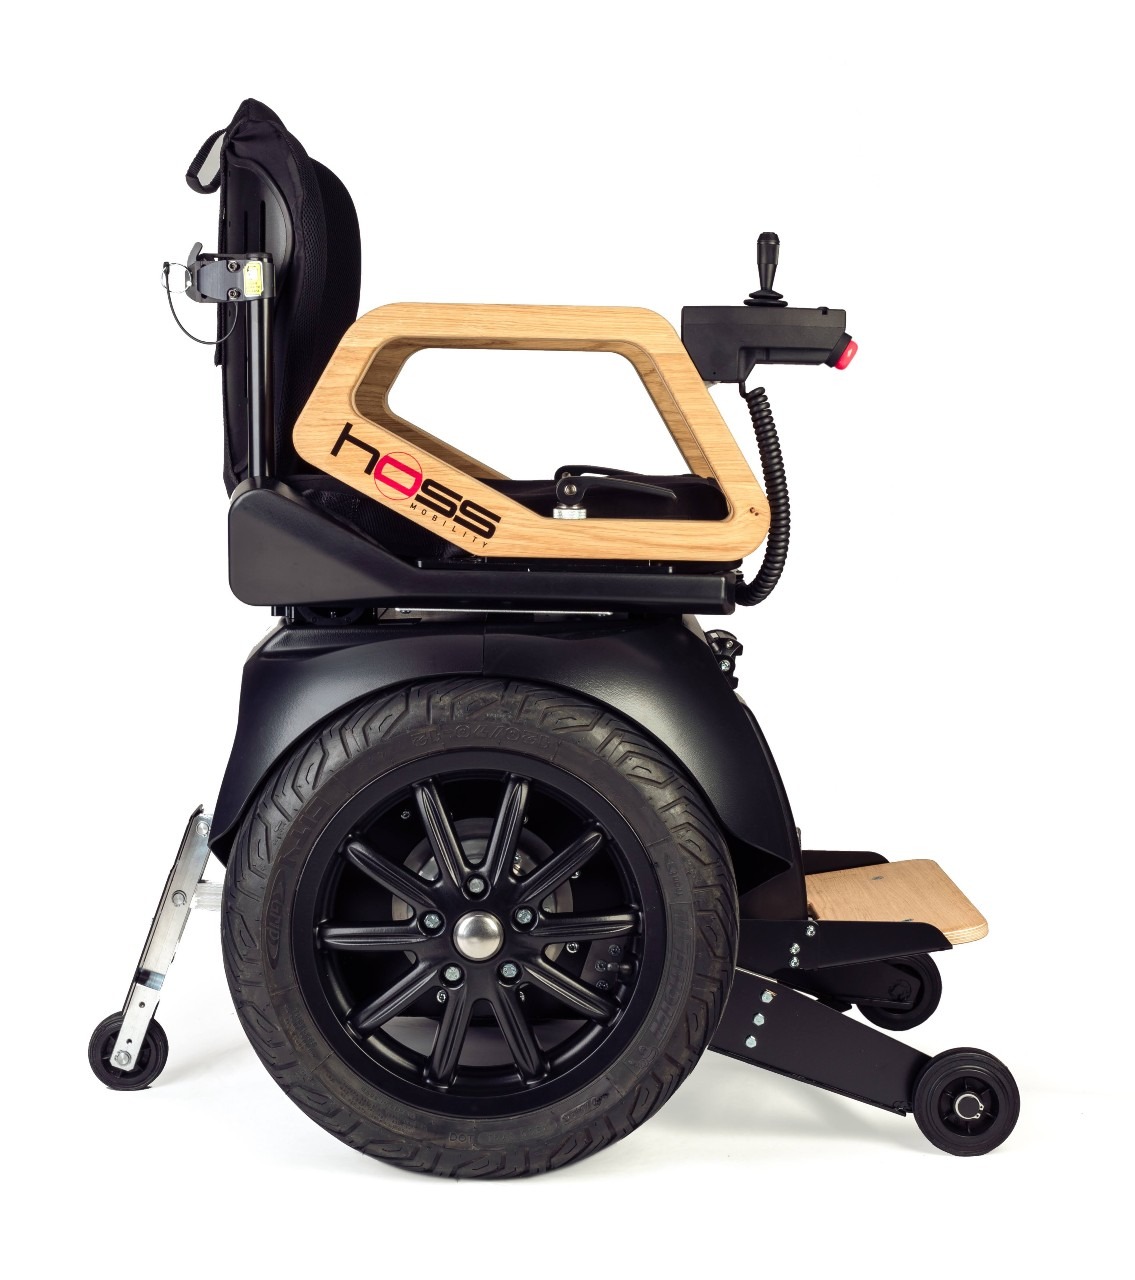 Tame Show cheat off road segway wheelchair Dear Human considerate